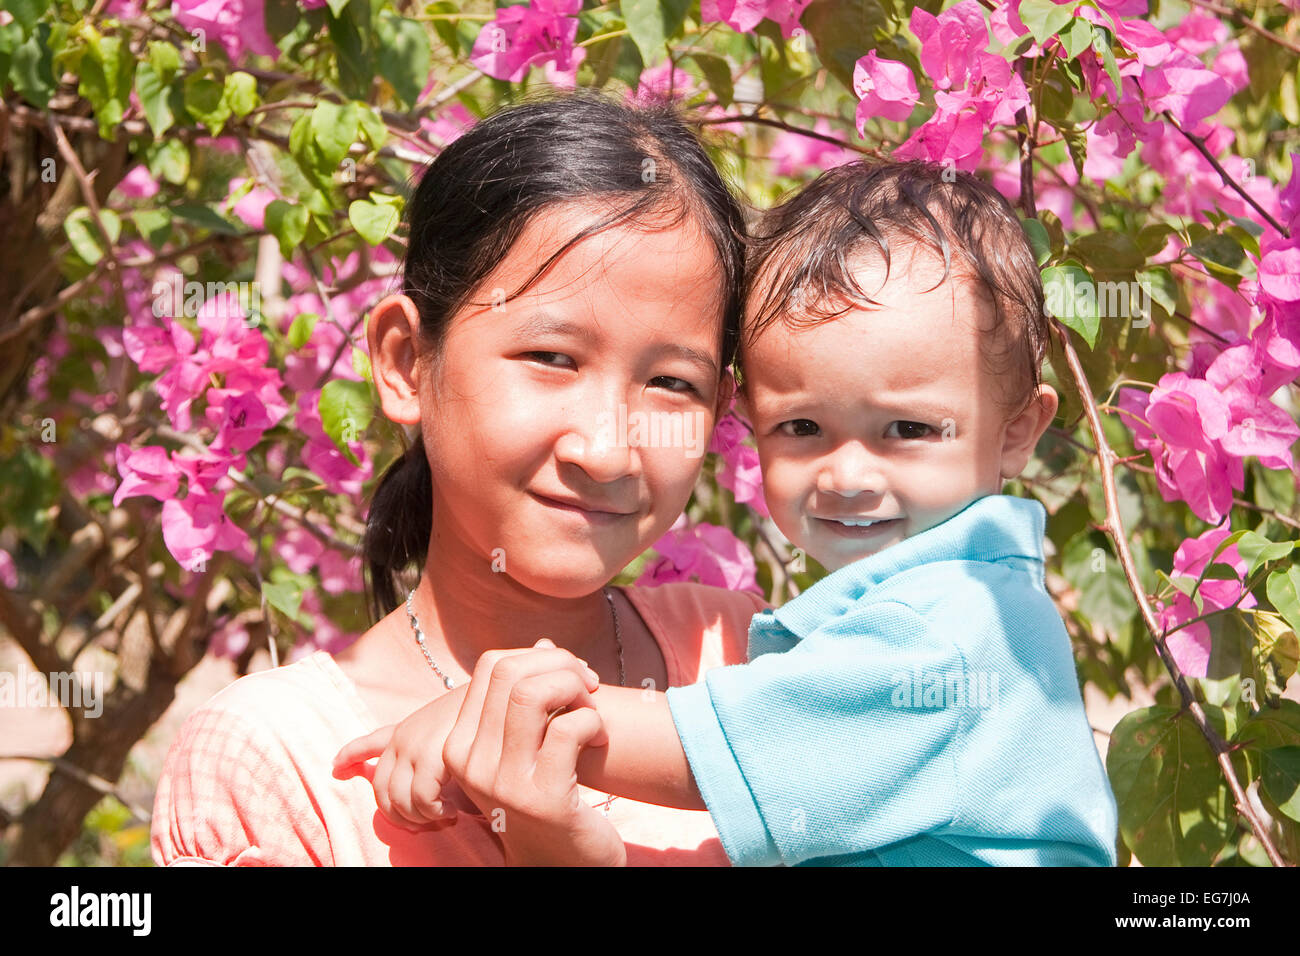 Young girl with small child on the arm, Phu Quoc, Vietnam, Asia Stock Photo